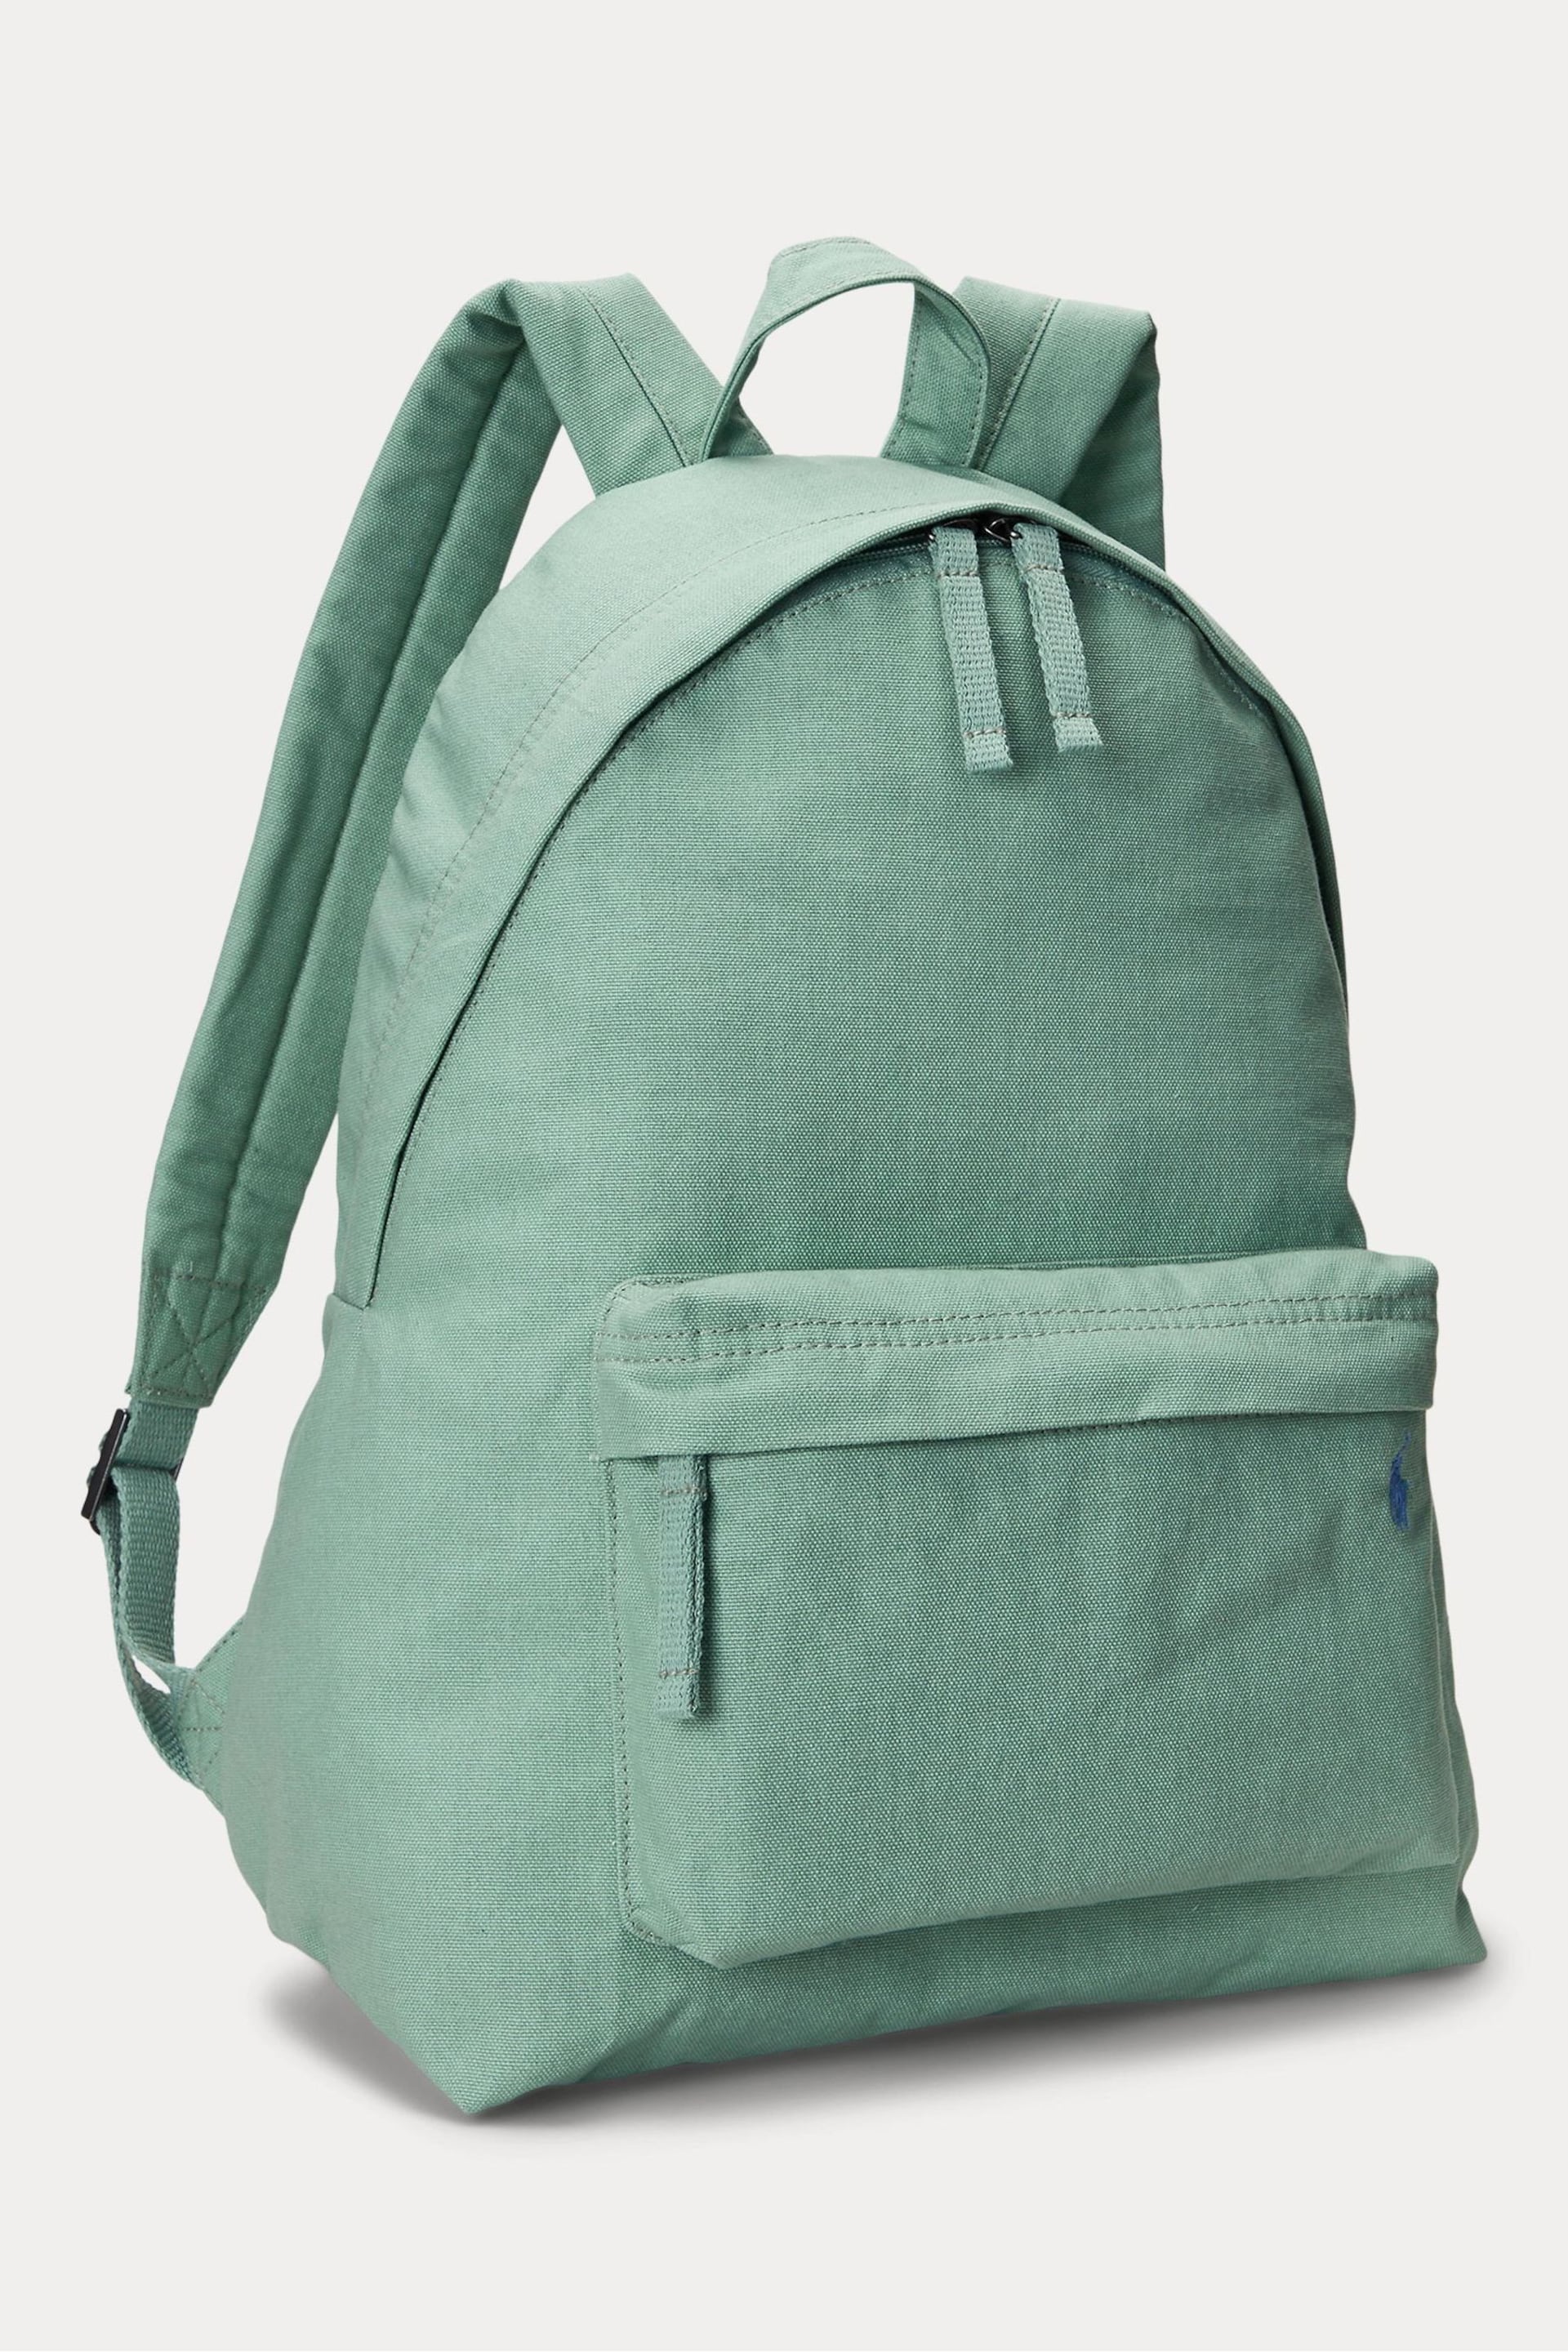 Polo Ralph Lauren Canvas Backpack - Image 3 of 7